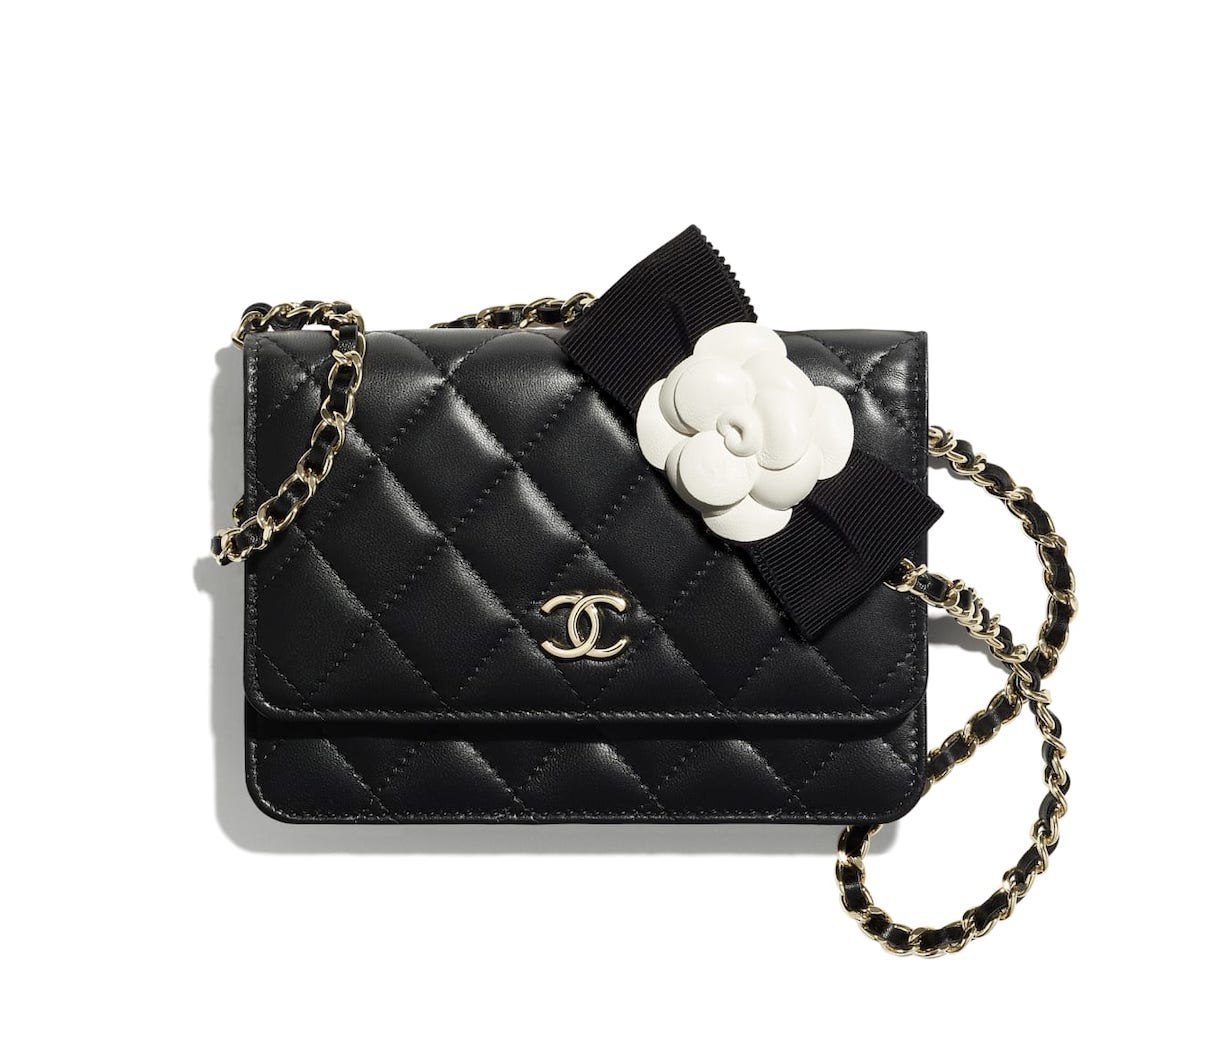 Special Edition of Chanel WOC (Wallet On Chain) in 2021 – Coco